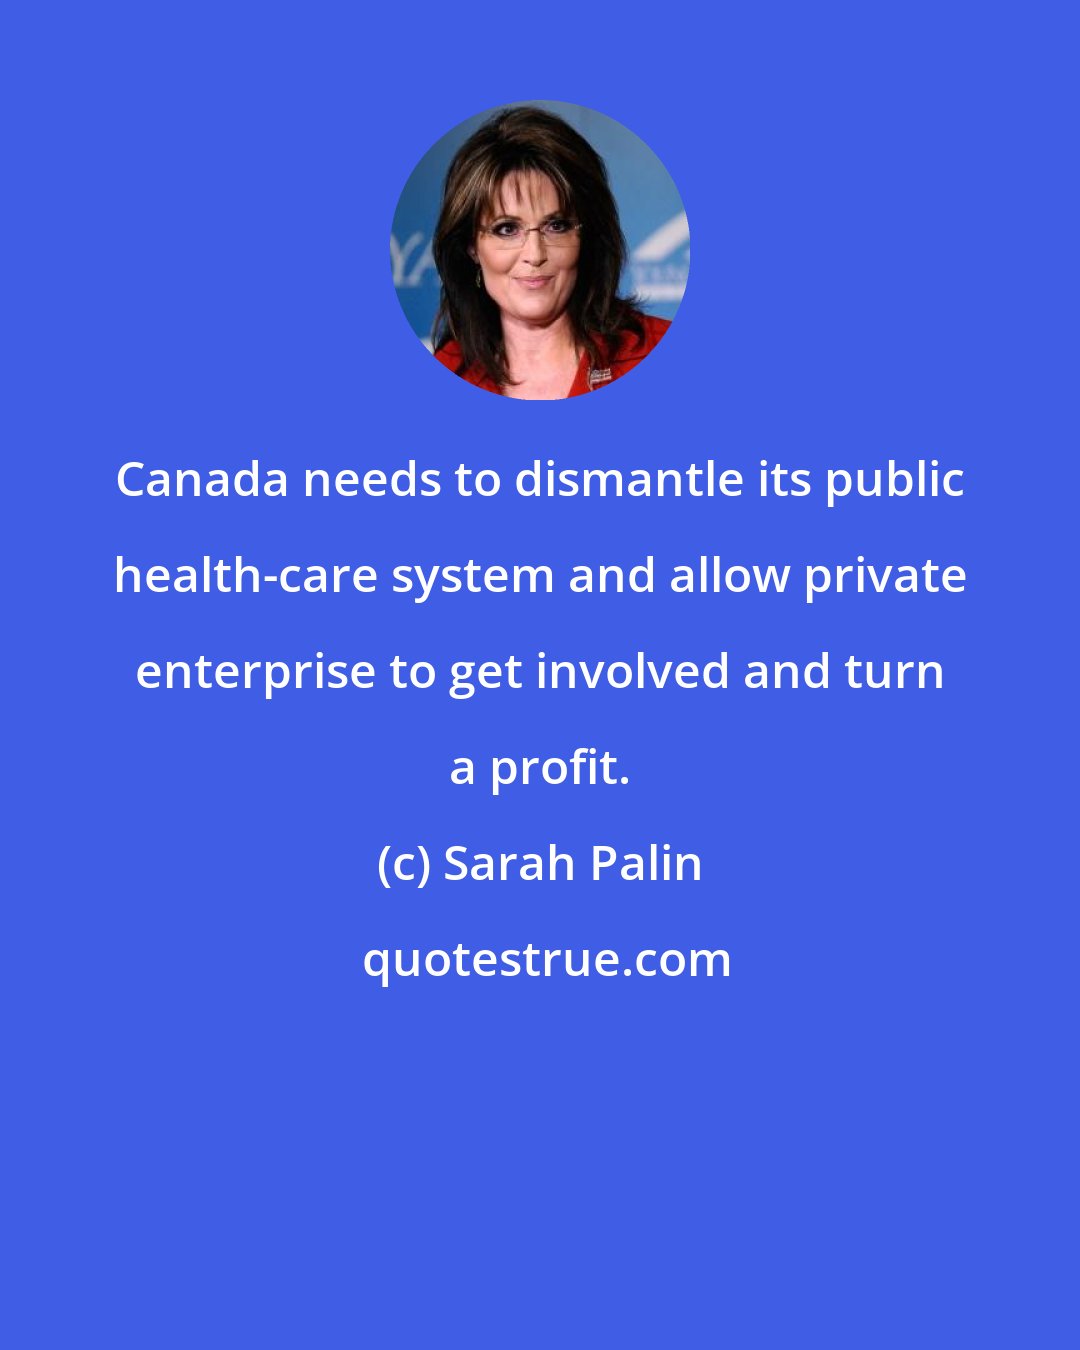 Sarah Palin: Canada needs to dismantle its public health-care system and allow private enterprise to get involved and turn a profit.